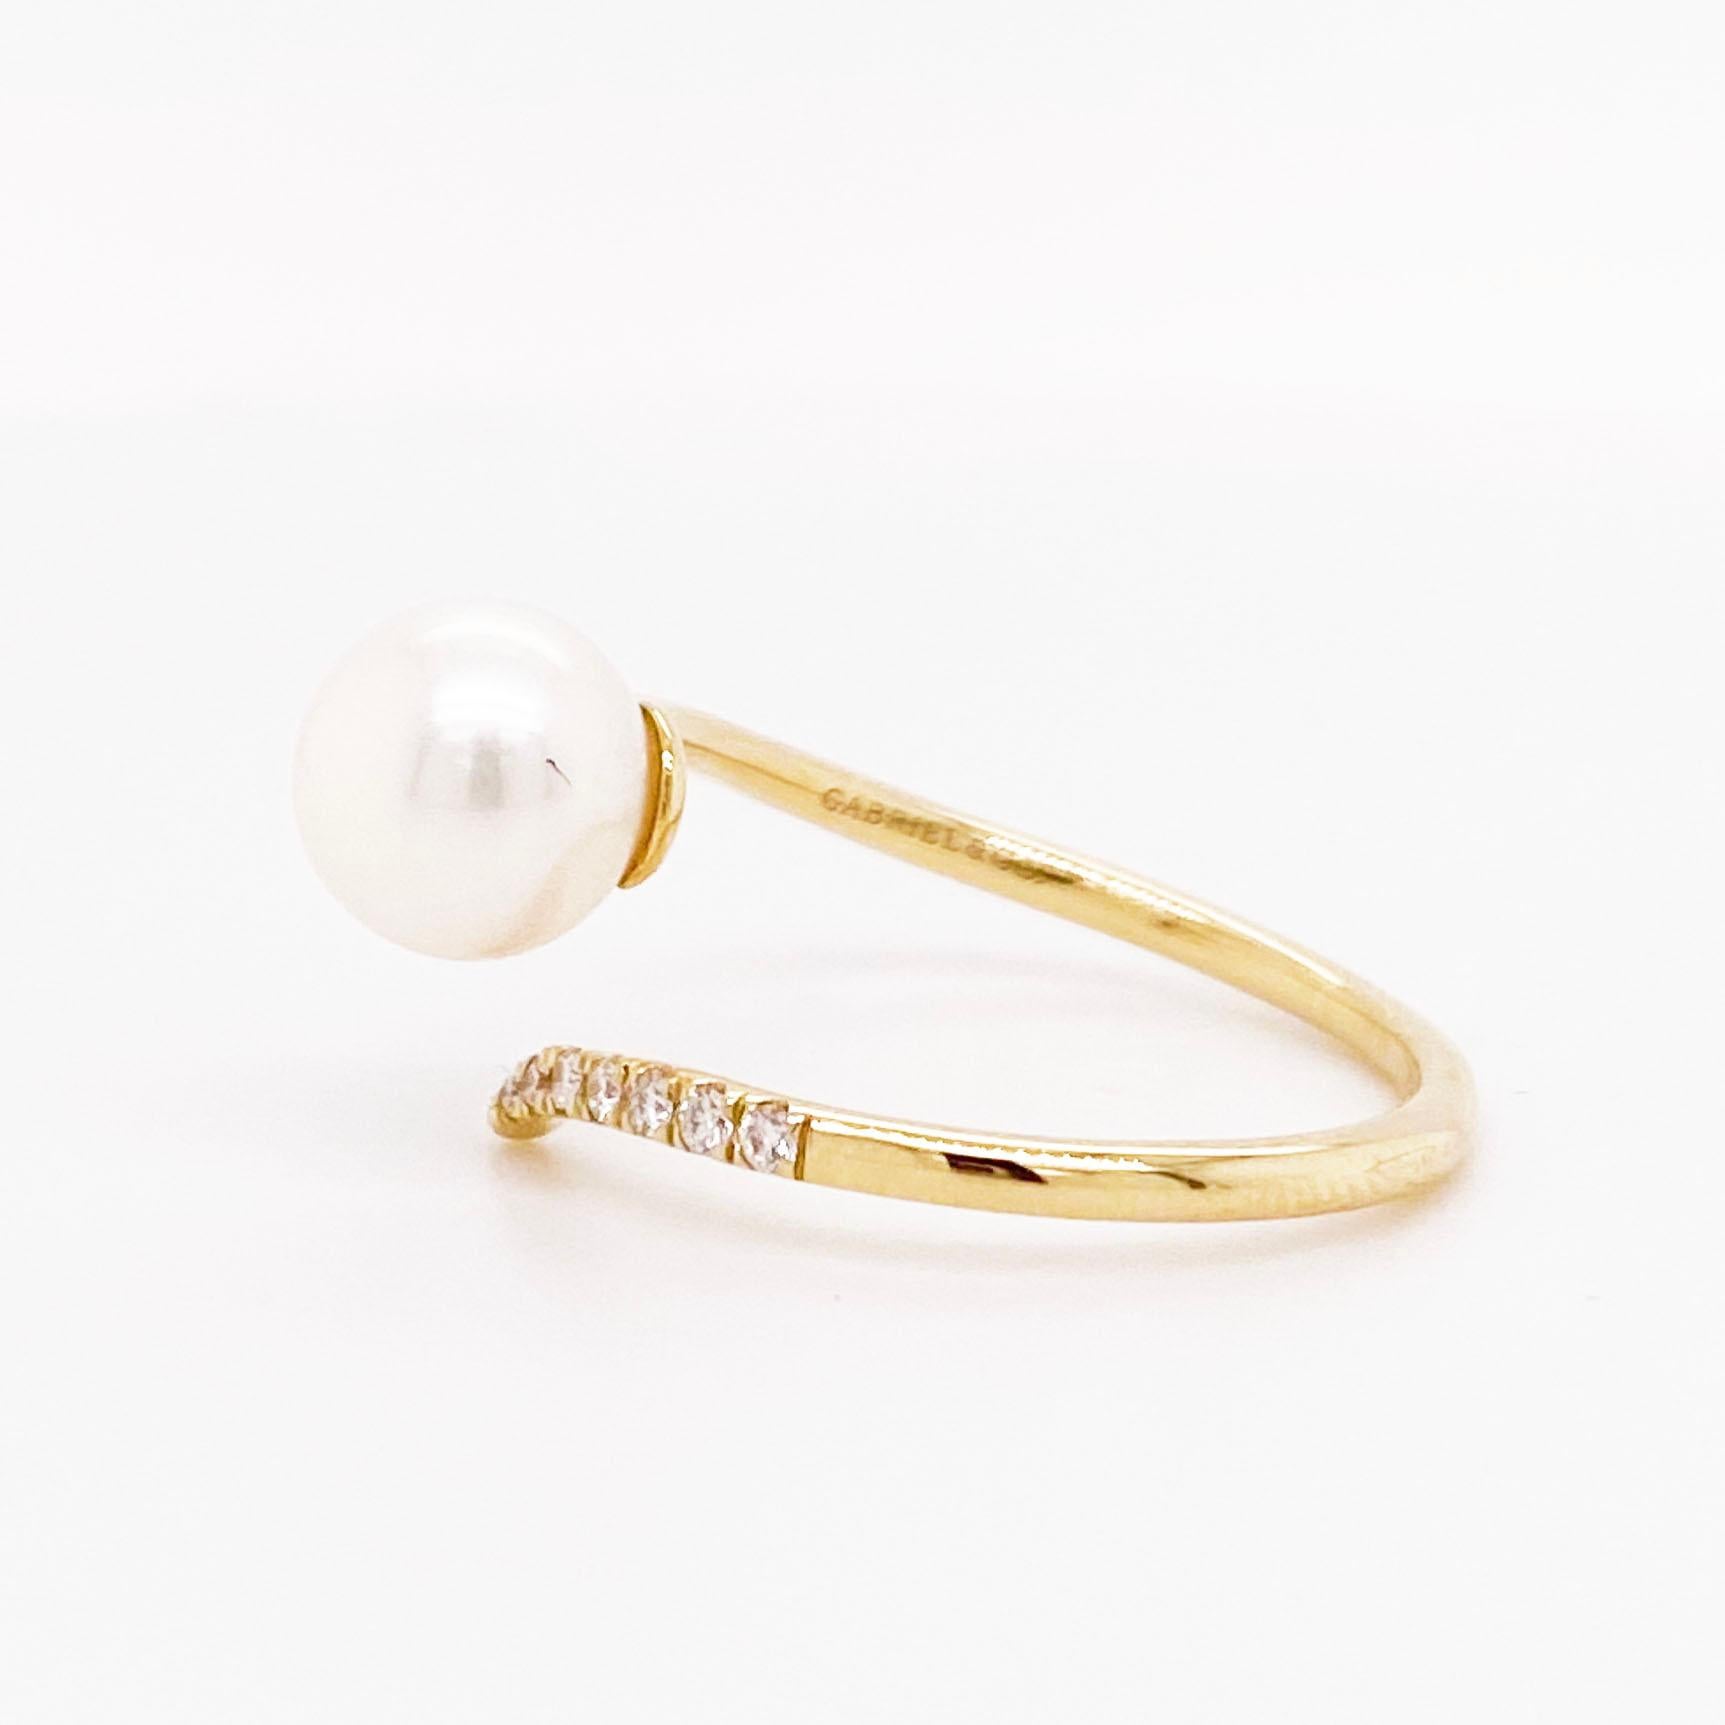 Pearl Diamond Ring w Bypass Assymetrical Design Open Wrap Ring, 14K Yellow Gold 2